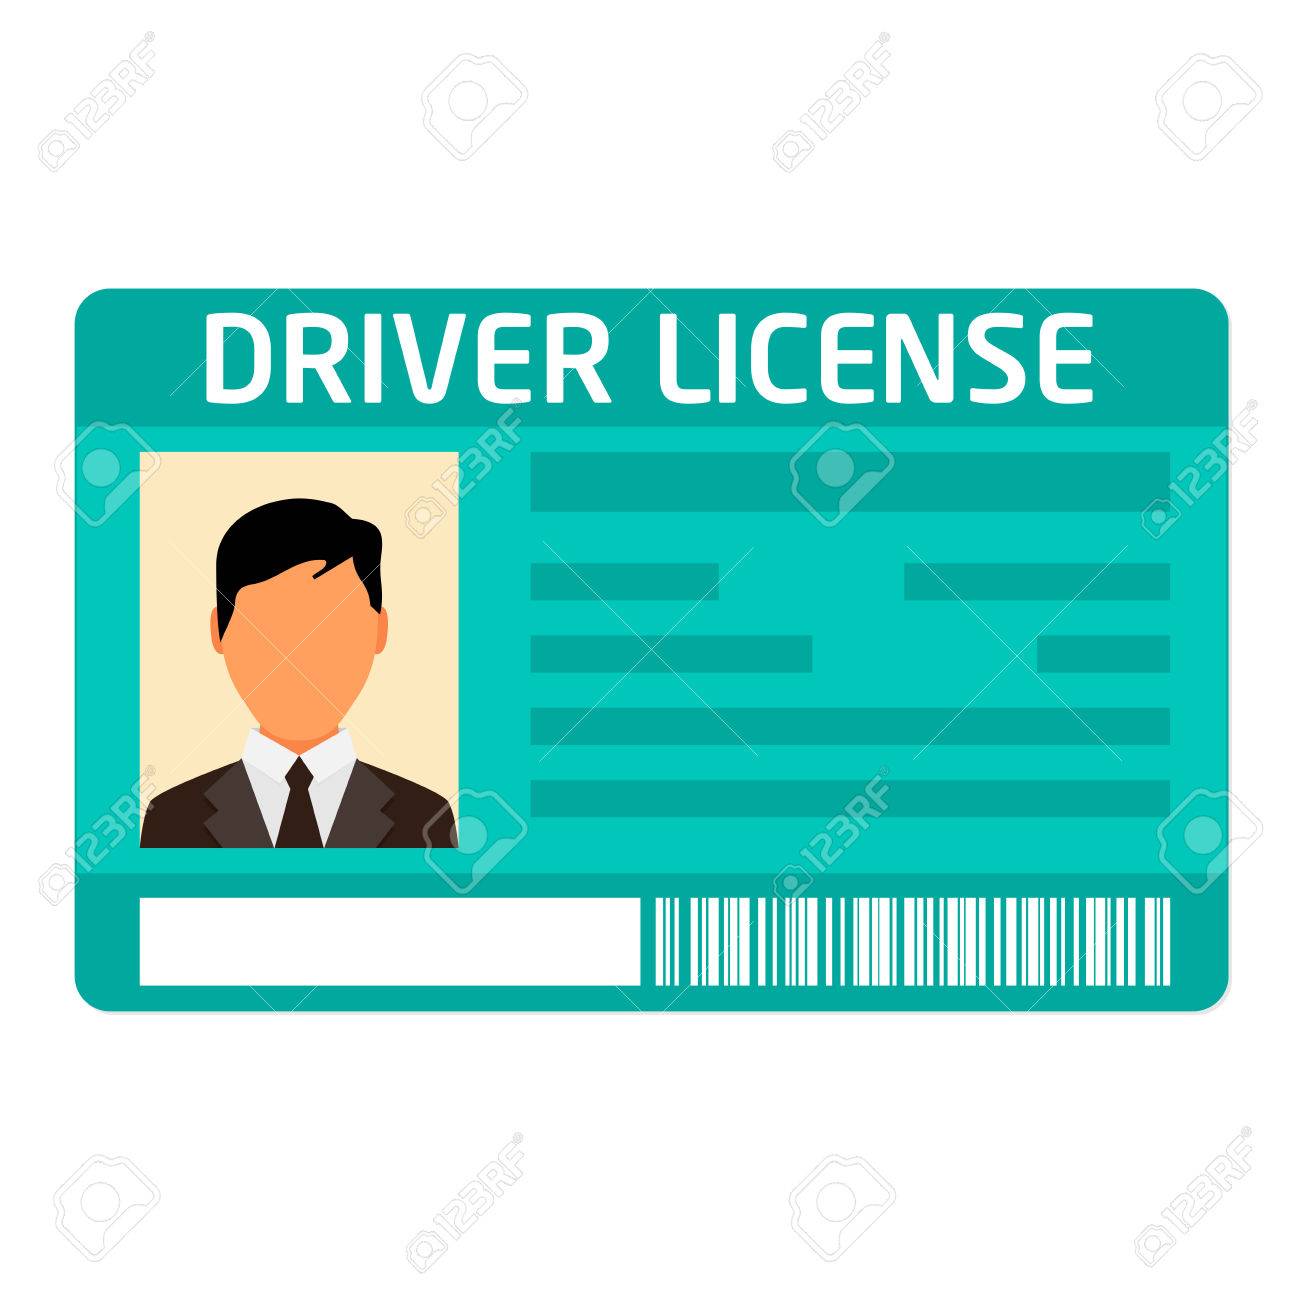 Car Driver License Identification With Photo Isolated On White